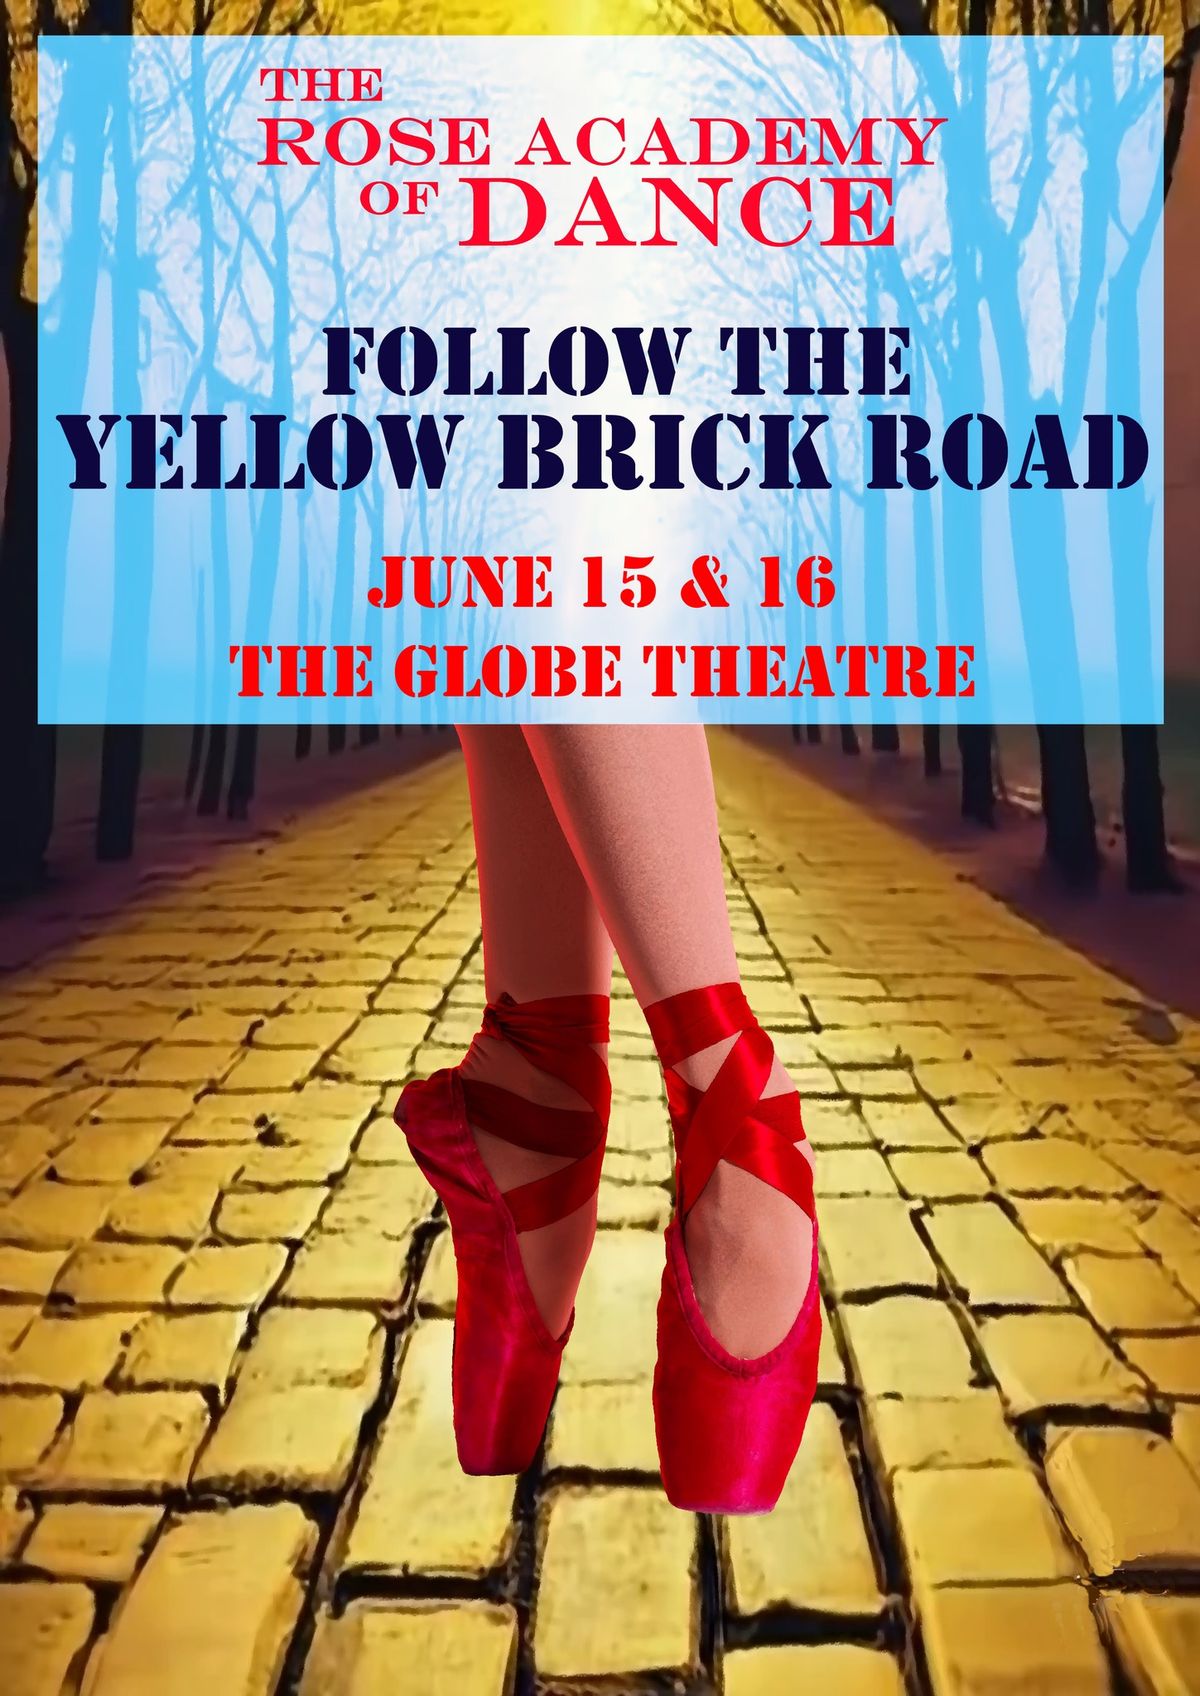 Follow The Yellow Brick Road - The Dance Show